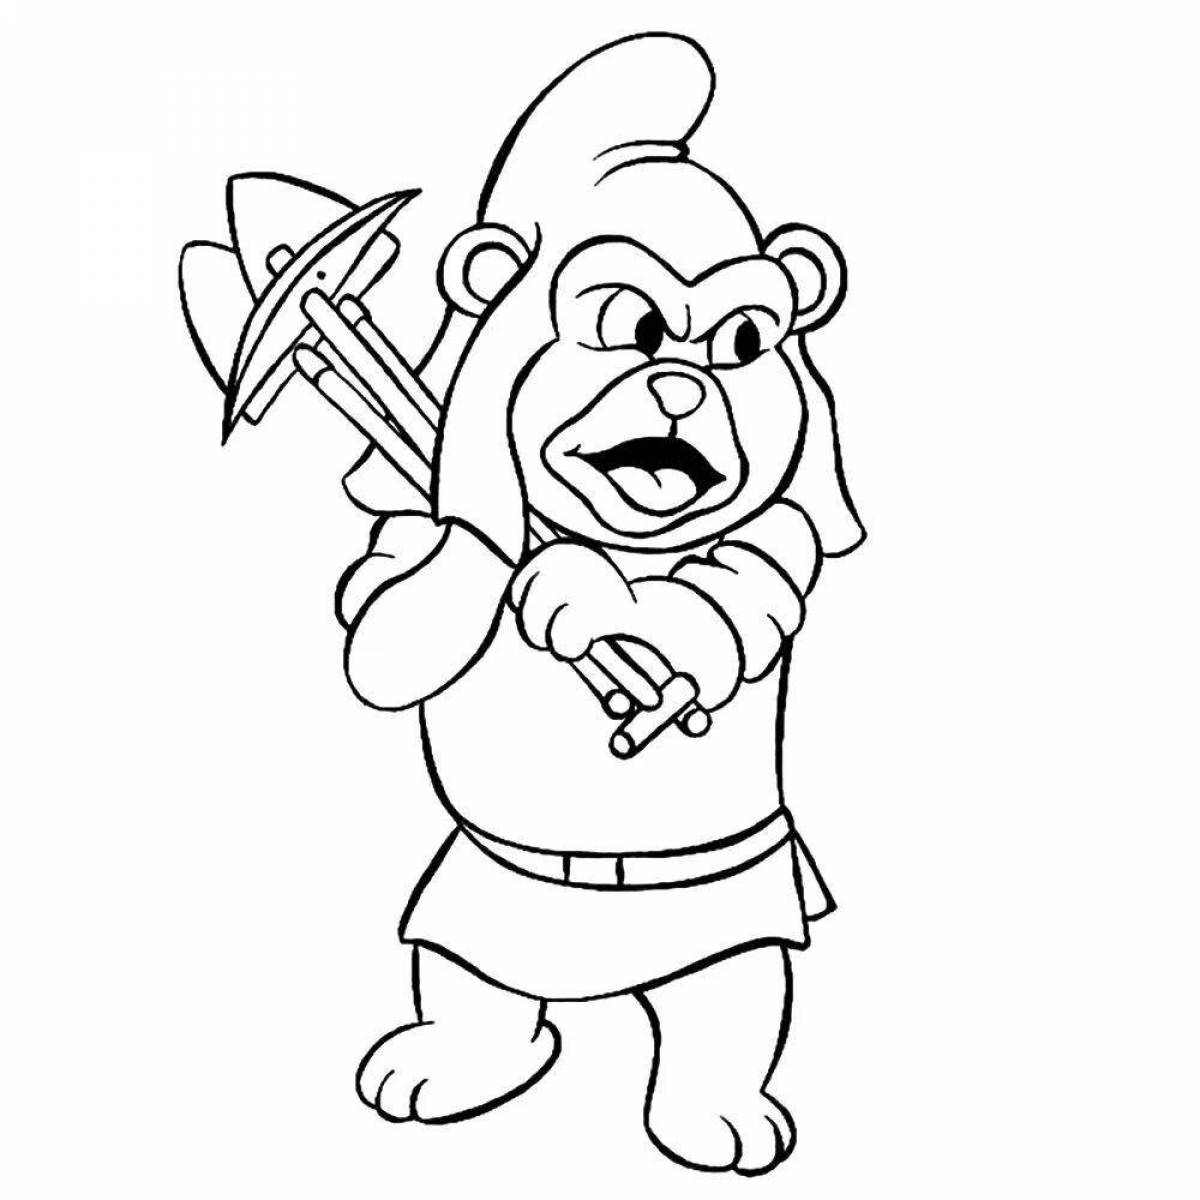 Colorful gummy bear coloring page